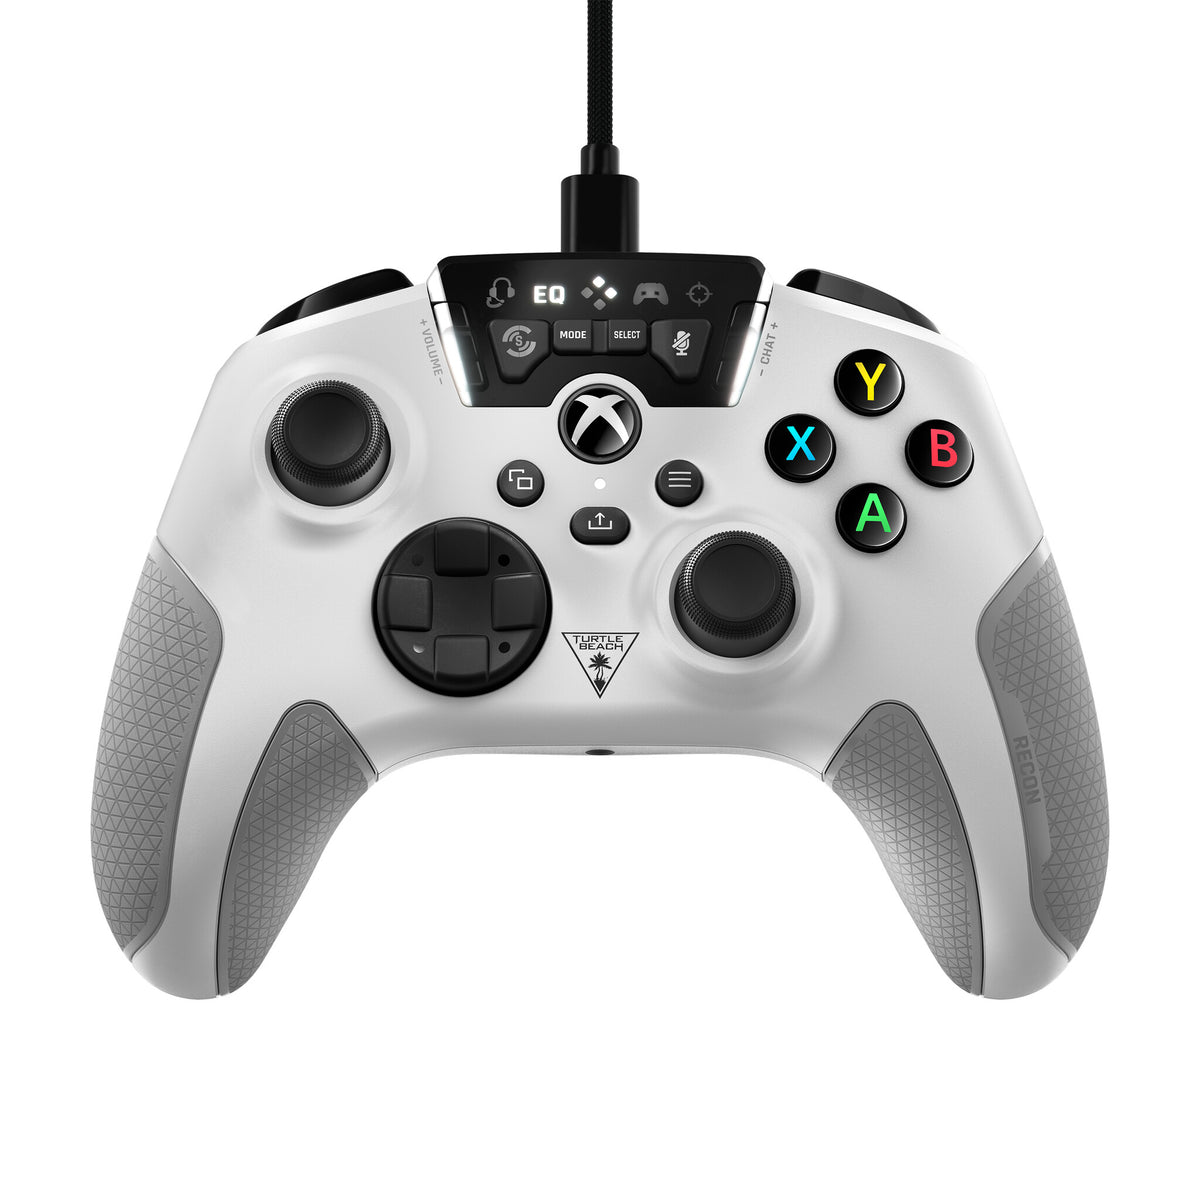 Turtle Beach Recon - USB Wired Gamepad for PC / Xbox Series X|S in Grey / White